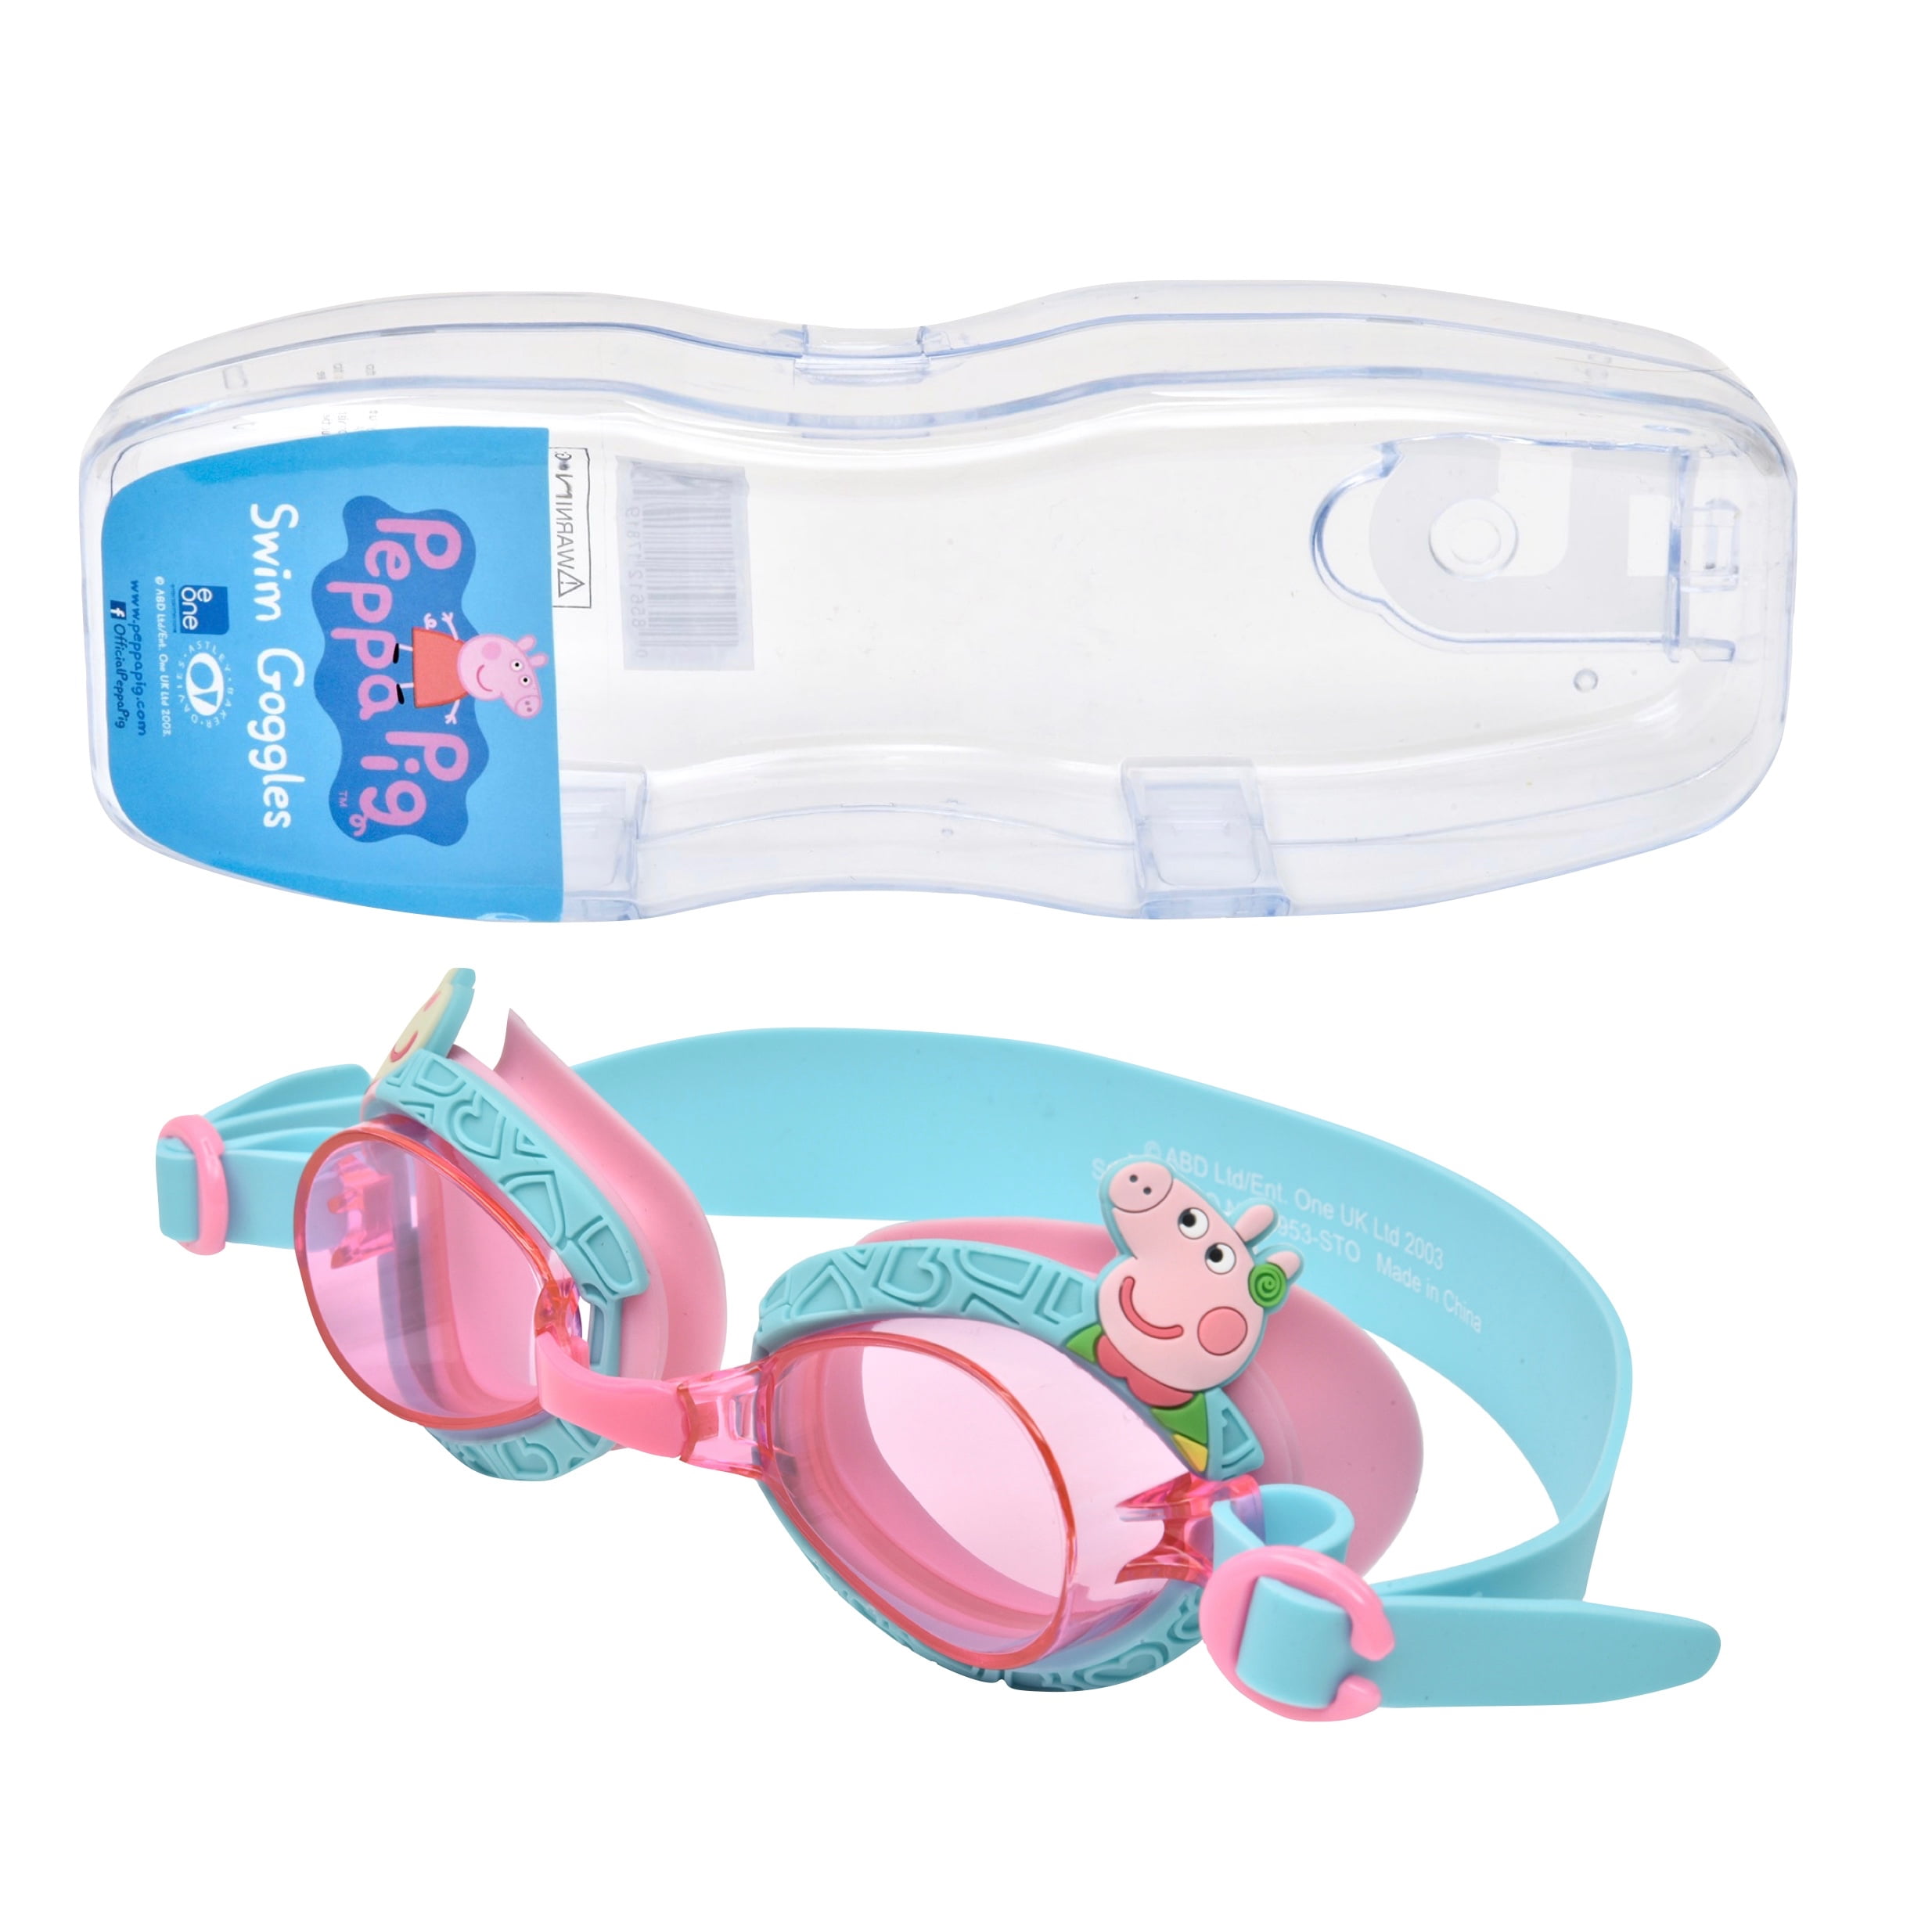 PINK ADJUSTABLE STRAP Details about   PEPPA PIG MOLDED SWIMMING GOGGLES  AGES 3 